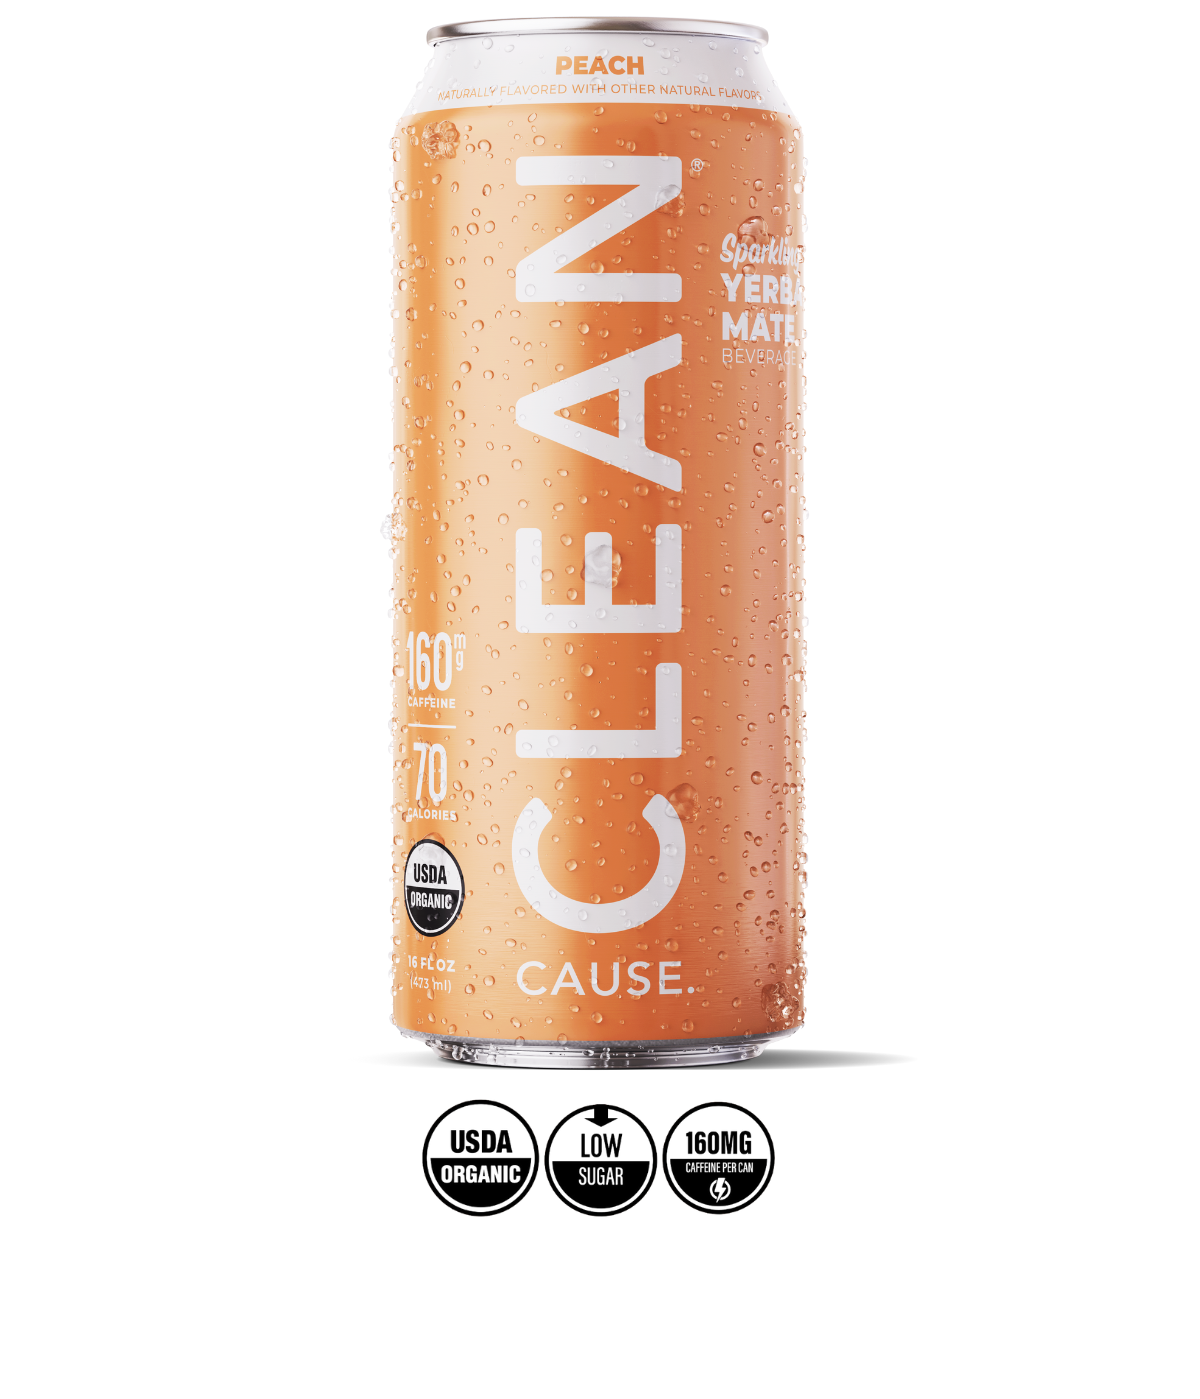 A can of CLEAN Cause Peach with the labels USDA Organic, 160mg of caffeine, and low sugar